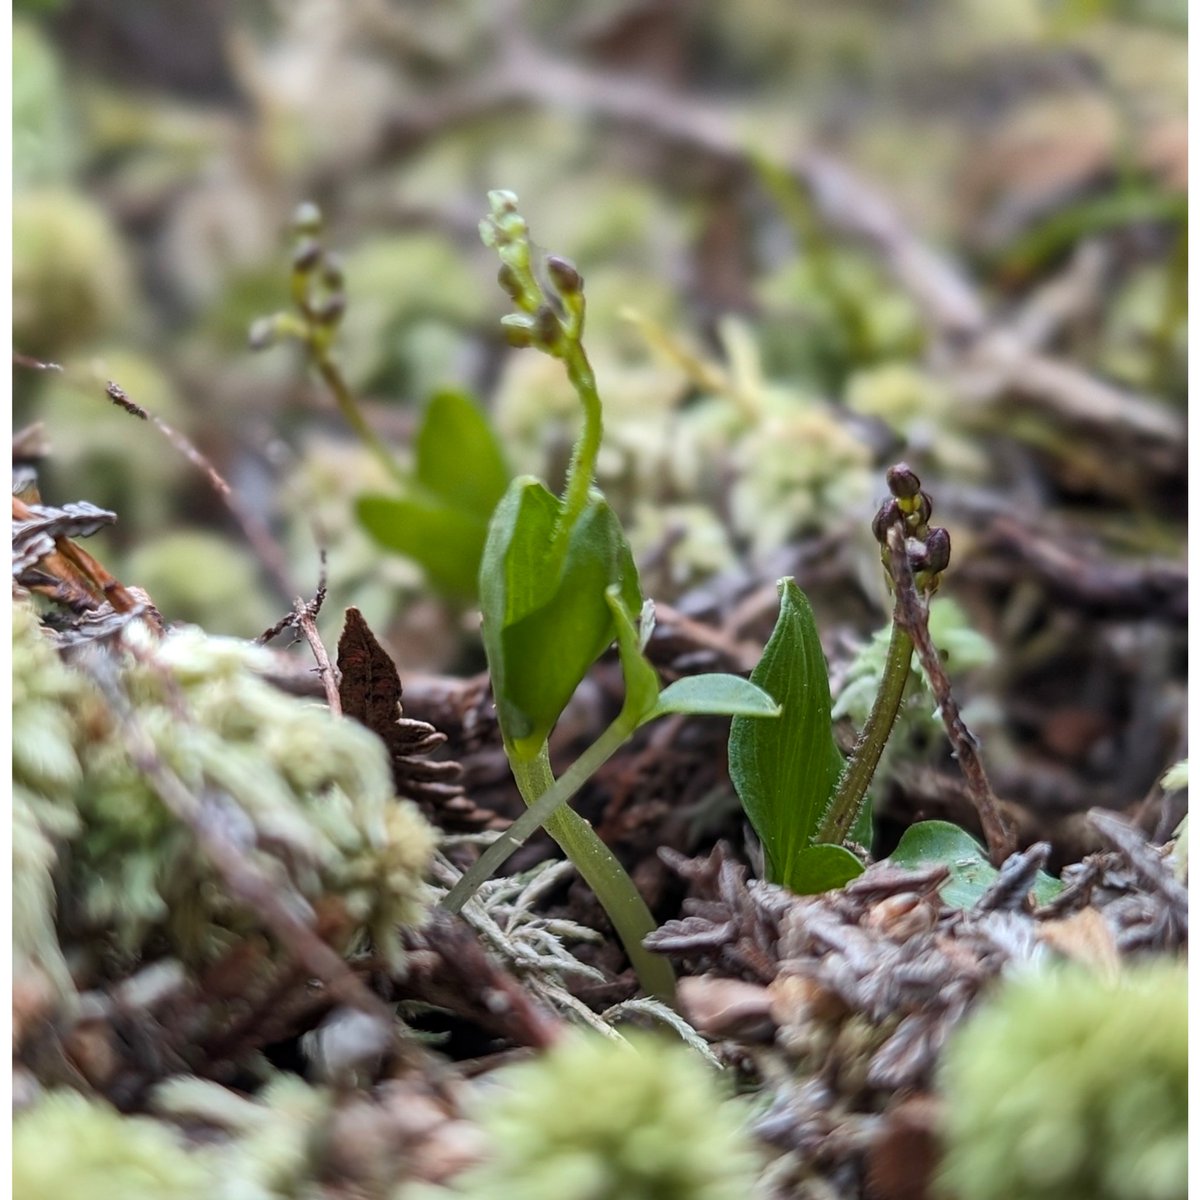 Already plenty of Lesser Twayblade, Neottia cordata, in full flower on Exmoor today and lots in bud. Very dry up there. @ukorchids